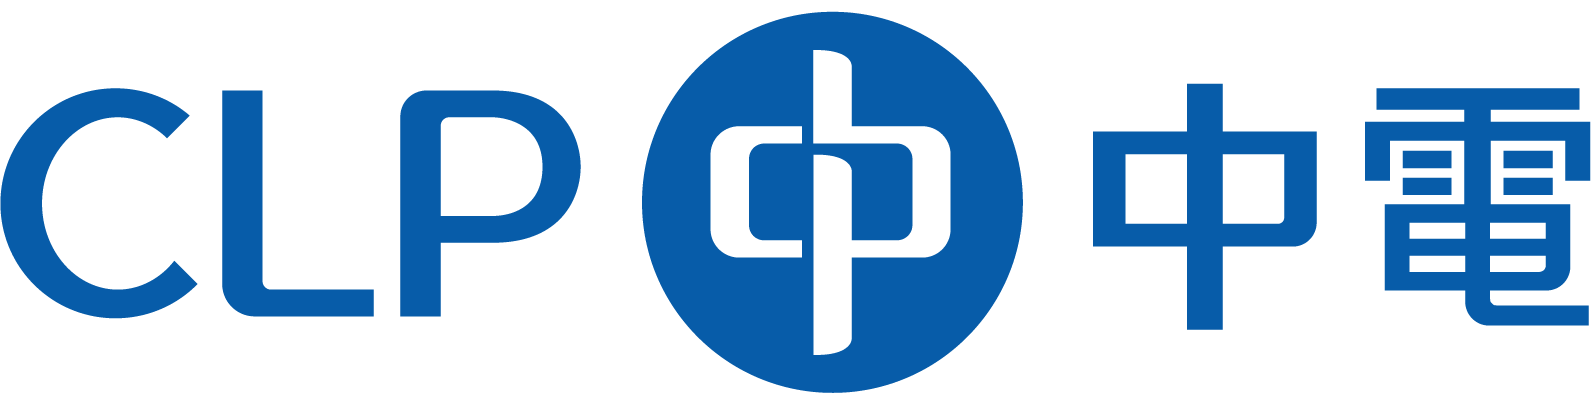 CLP Group Logo png